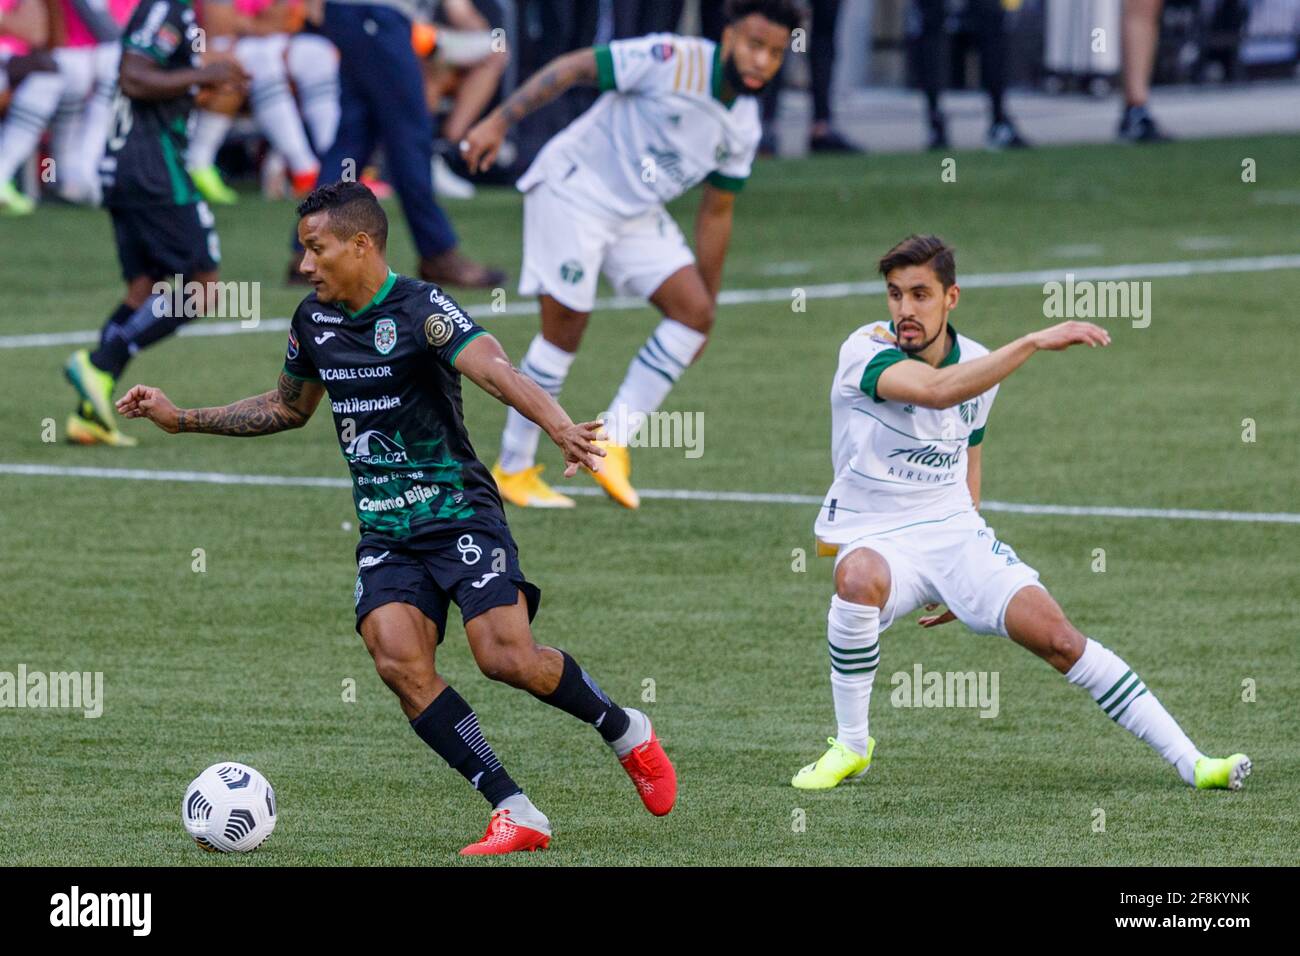 Portland, USA. 13th Apr, 2021. CD Marathon's Luis Garrido (8) steals the ball. The Portland Timbers trounced Honduras' CD Marathon 5-0 on April 13, 2021 in Portland, Oregon, including a hat trick by Yimmy Chara, in their second meeting in the CONCACAF round of 16. Their first meeting last week in Honduras was a 2-2 tie. (Photo by John Rudoff/Sipa USA) Credit: Sipa USA/Alamy Live News Stock Photo